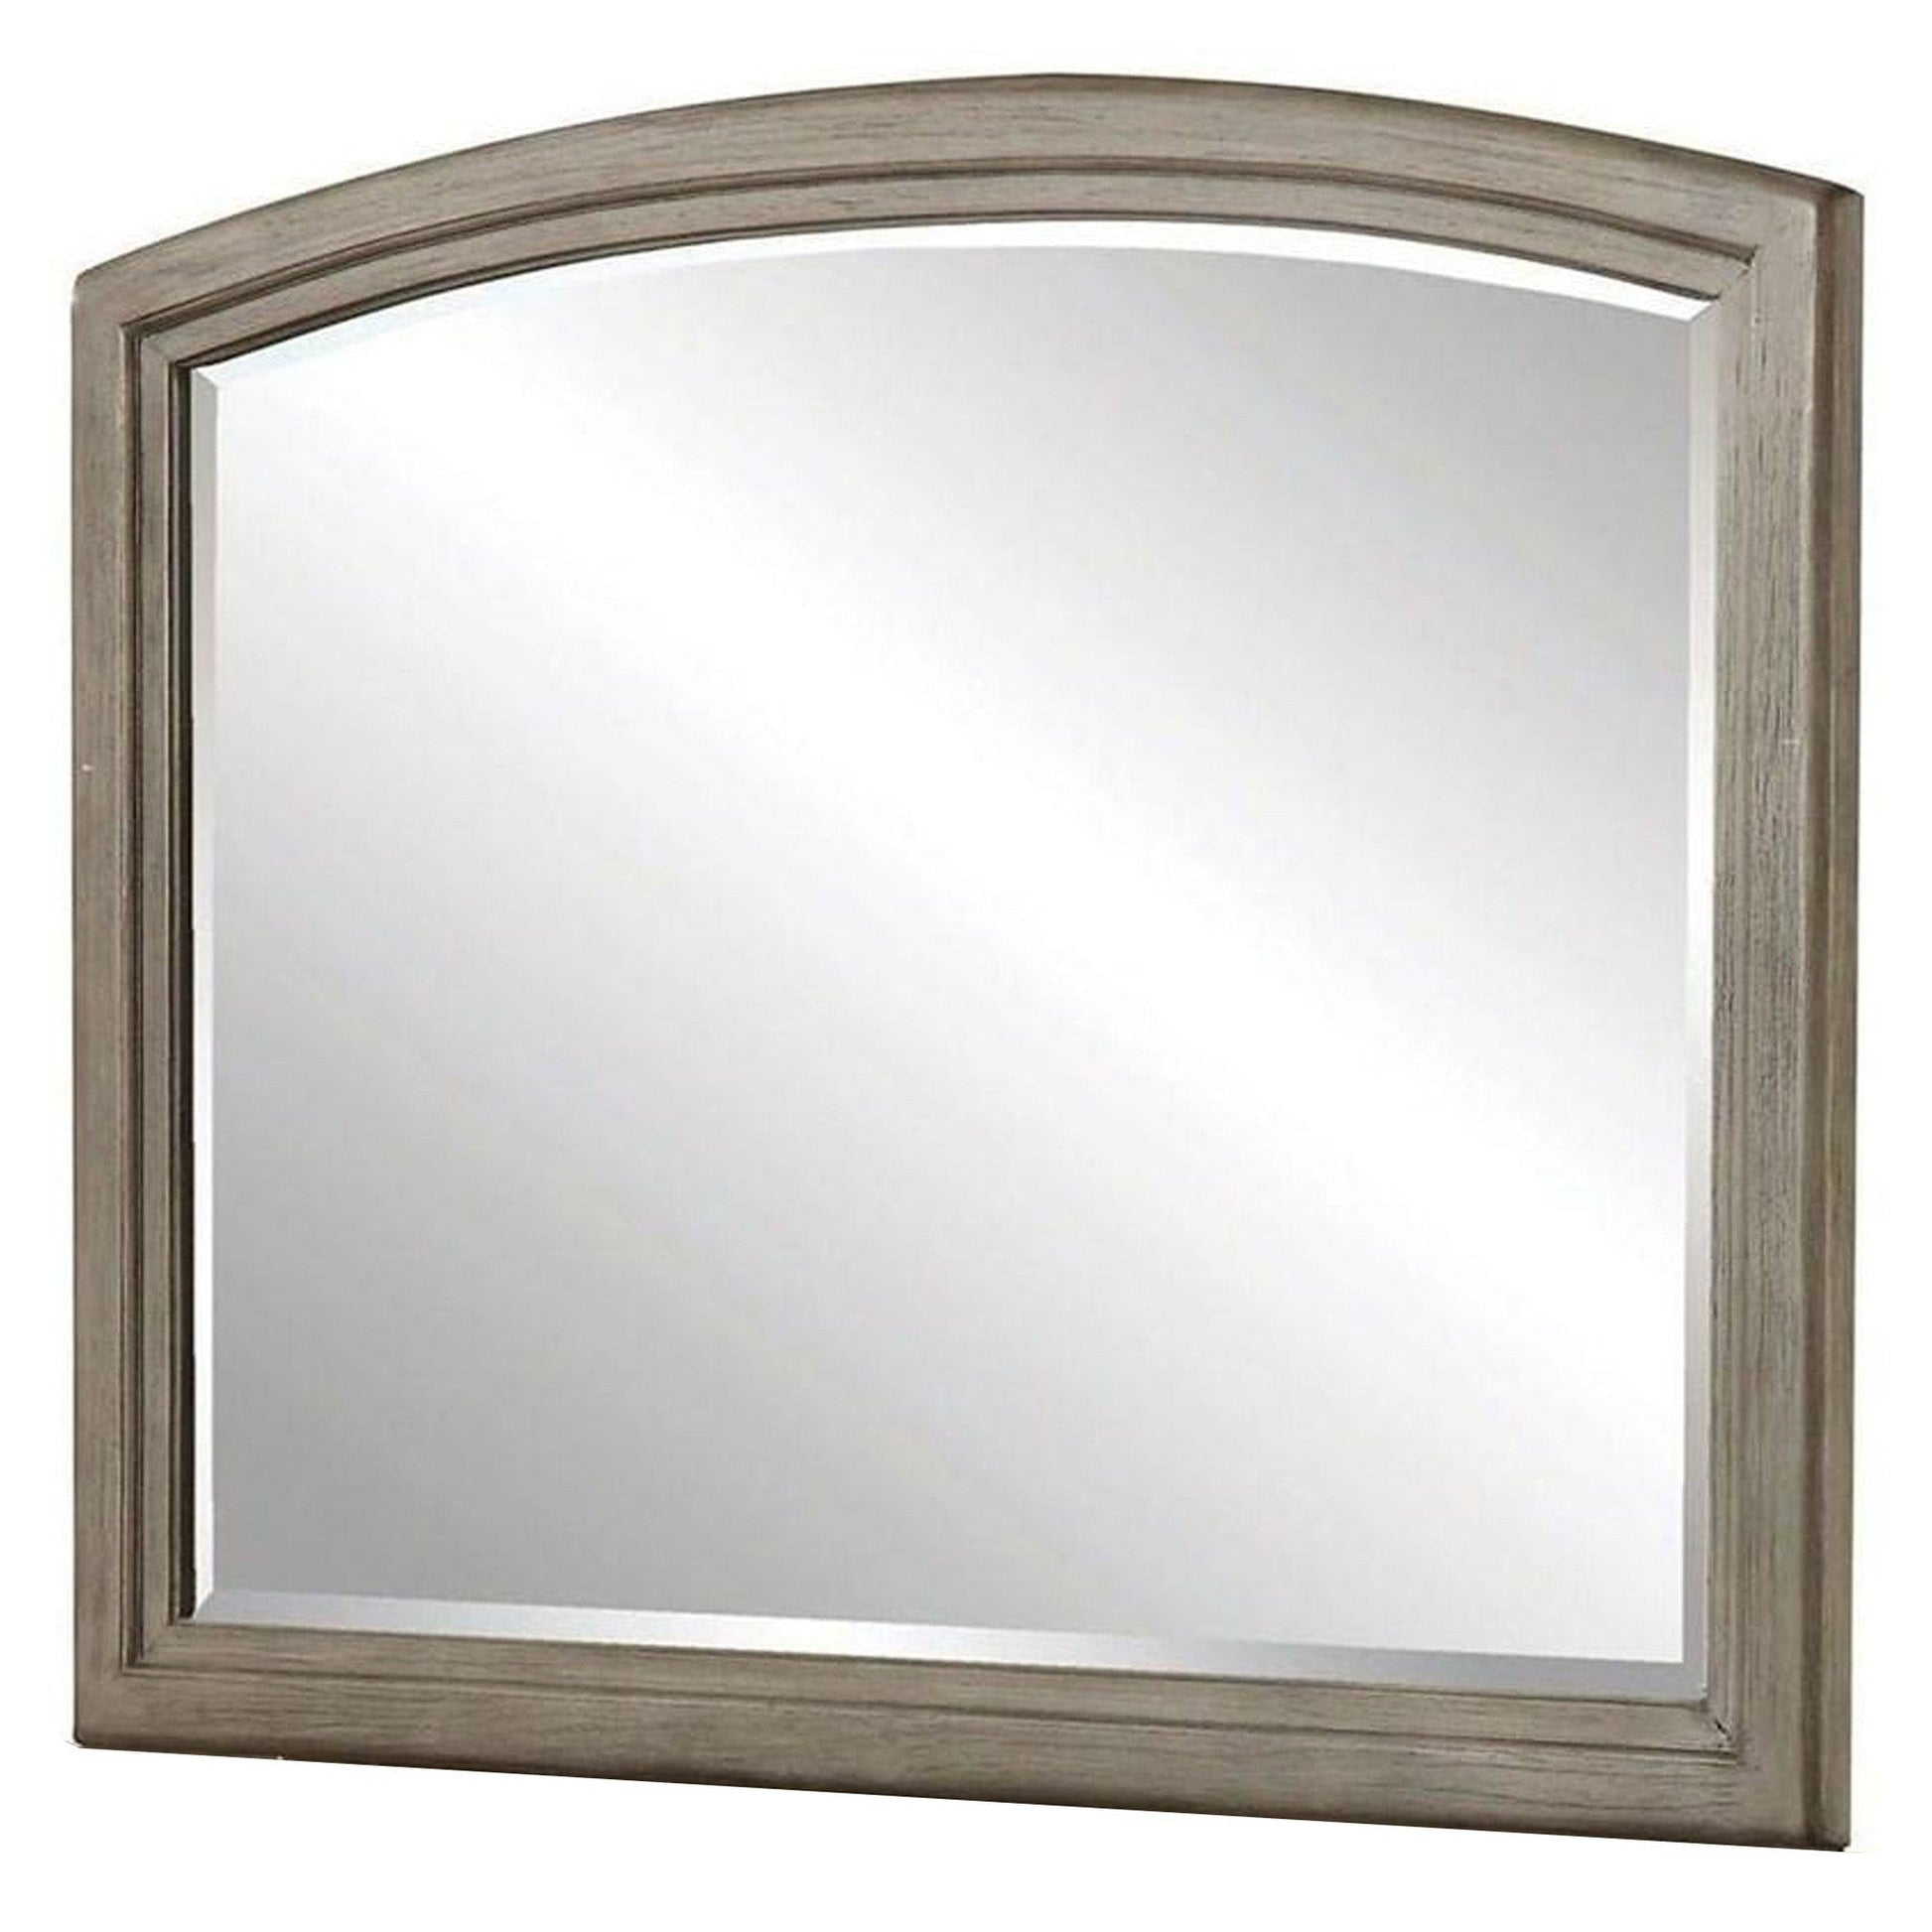 Benzara 46" Gray Transitional Style Curved Wooden Frame Mirror